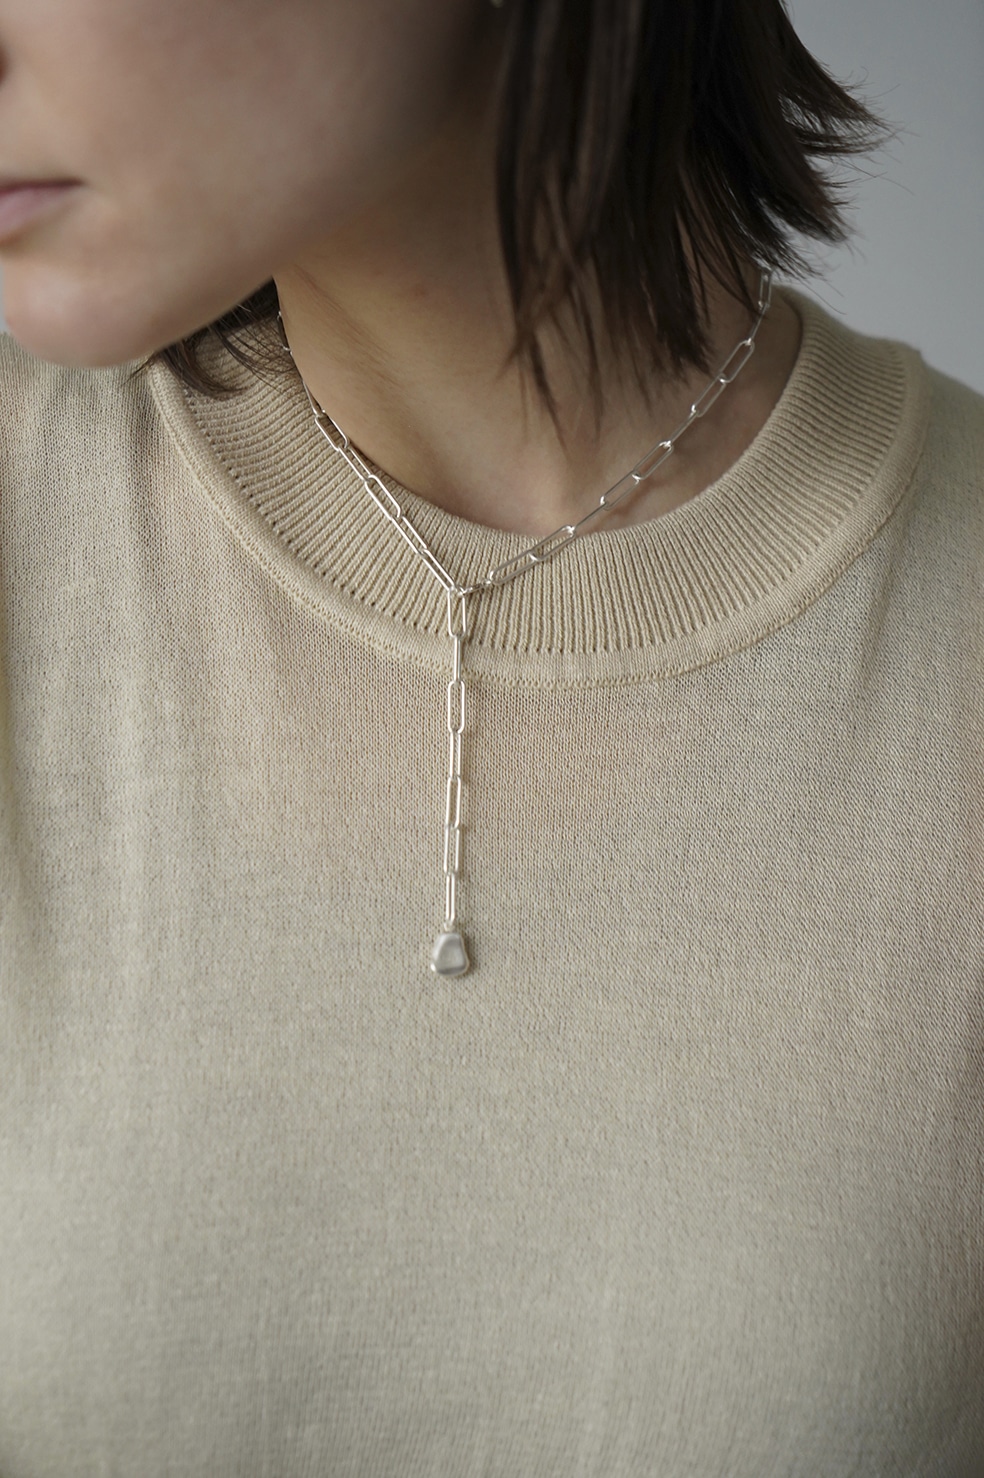 TEN.×CLANE PIN CABLE CHAIN NECKLACE｜ACCESSORIES(アクセサリー 